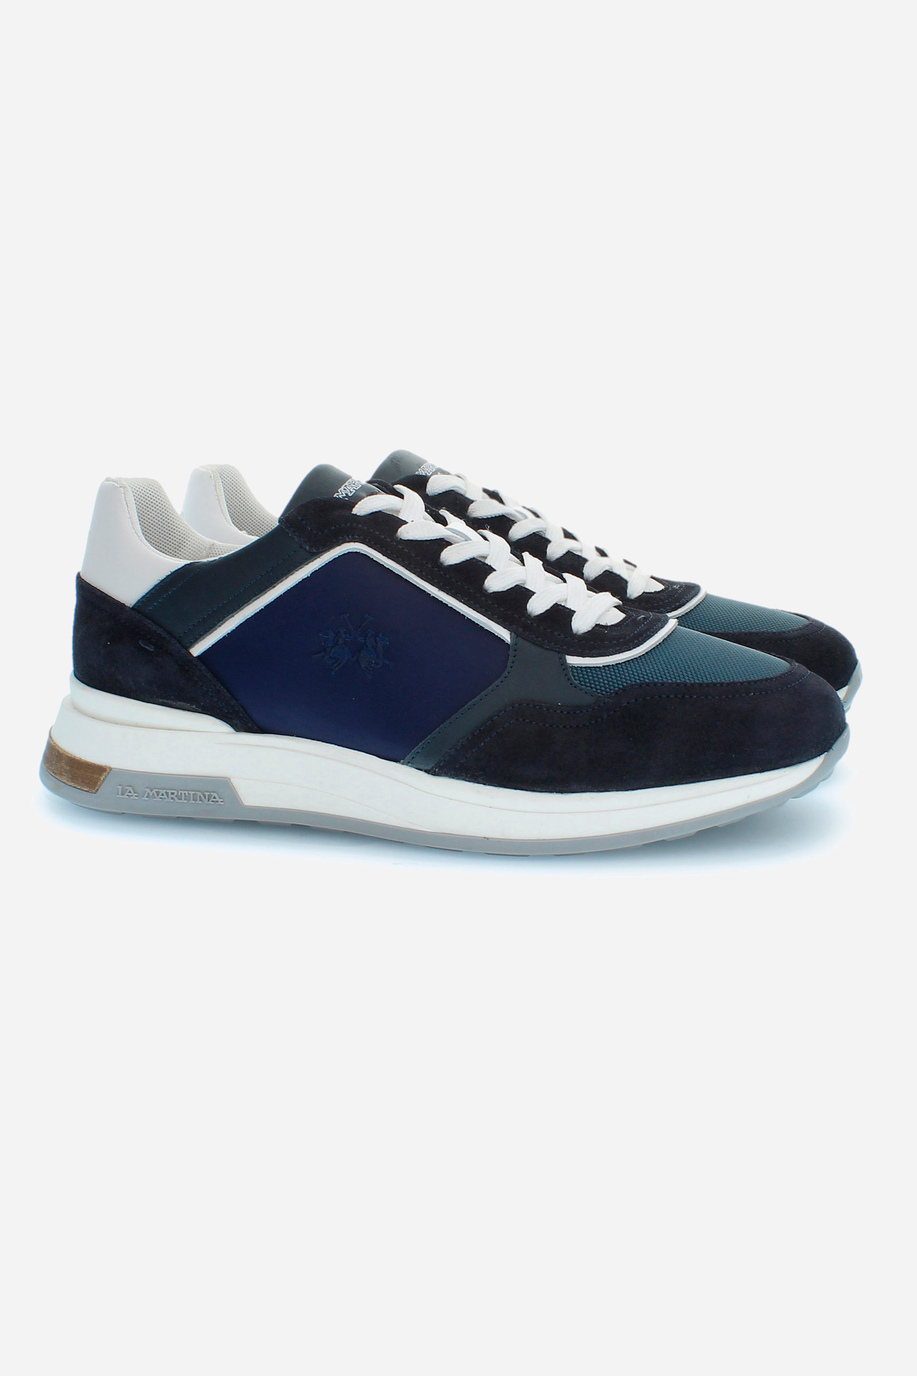 Men's trainers with raised sole in canvas and suede - Man shoes | La Martina - Official Online Shop